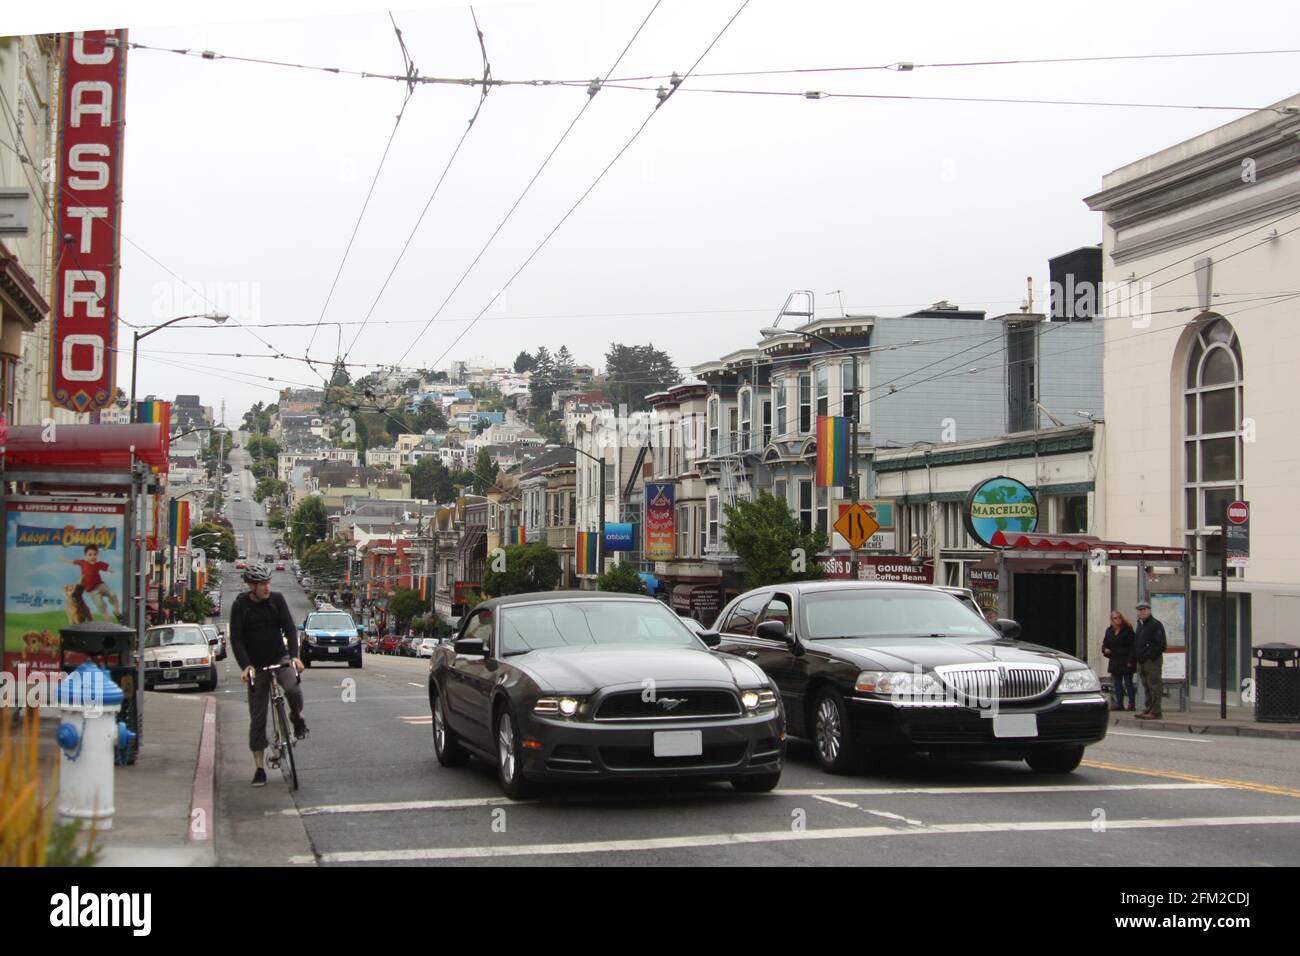 San Francisco, California / United States of America - May 27th 2013: Cars and a bike waiting at red stop light in the Castro district Stock Photo